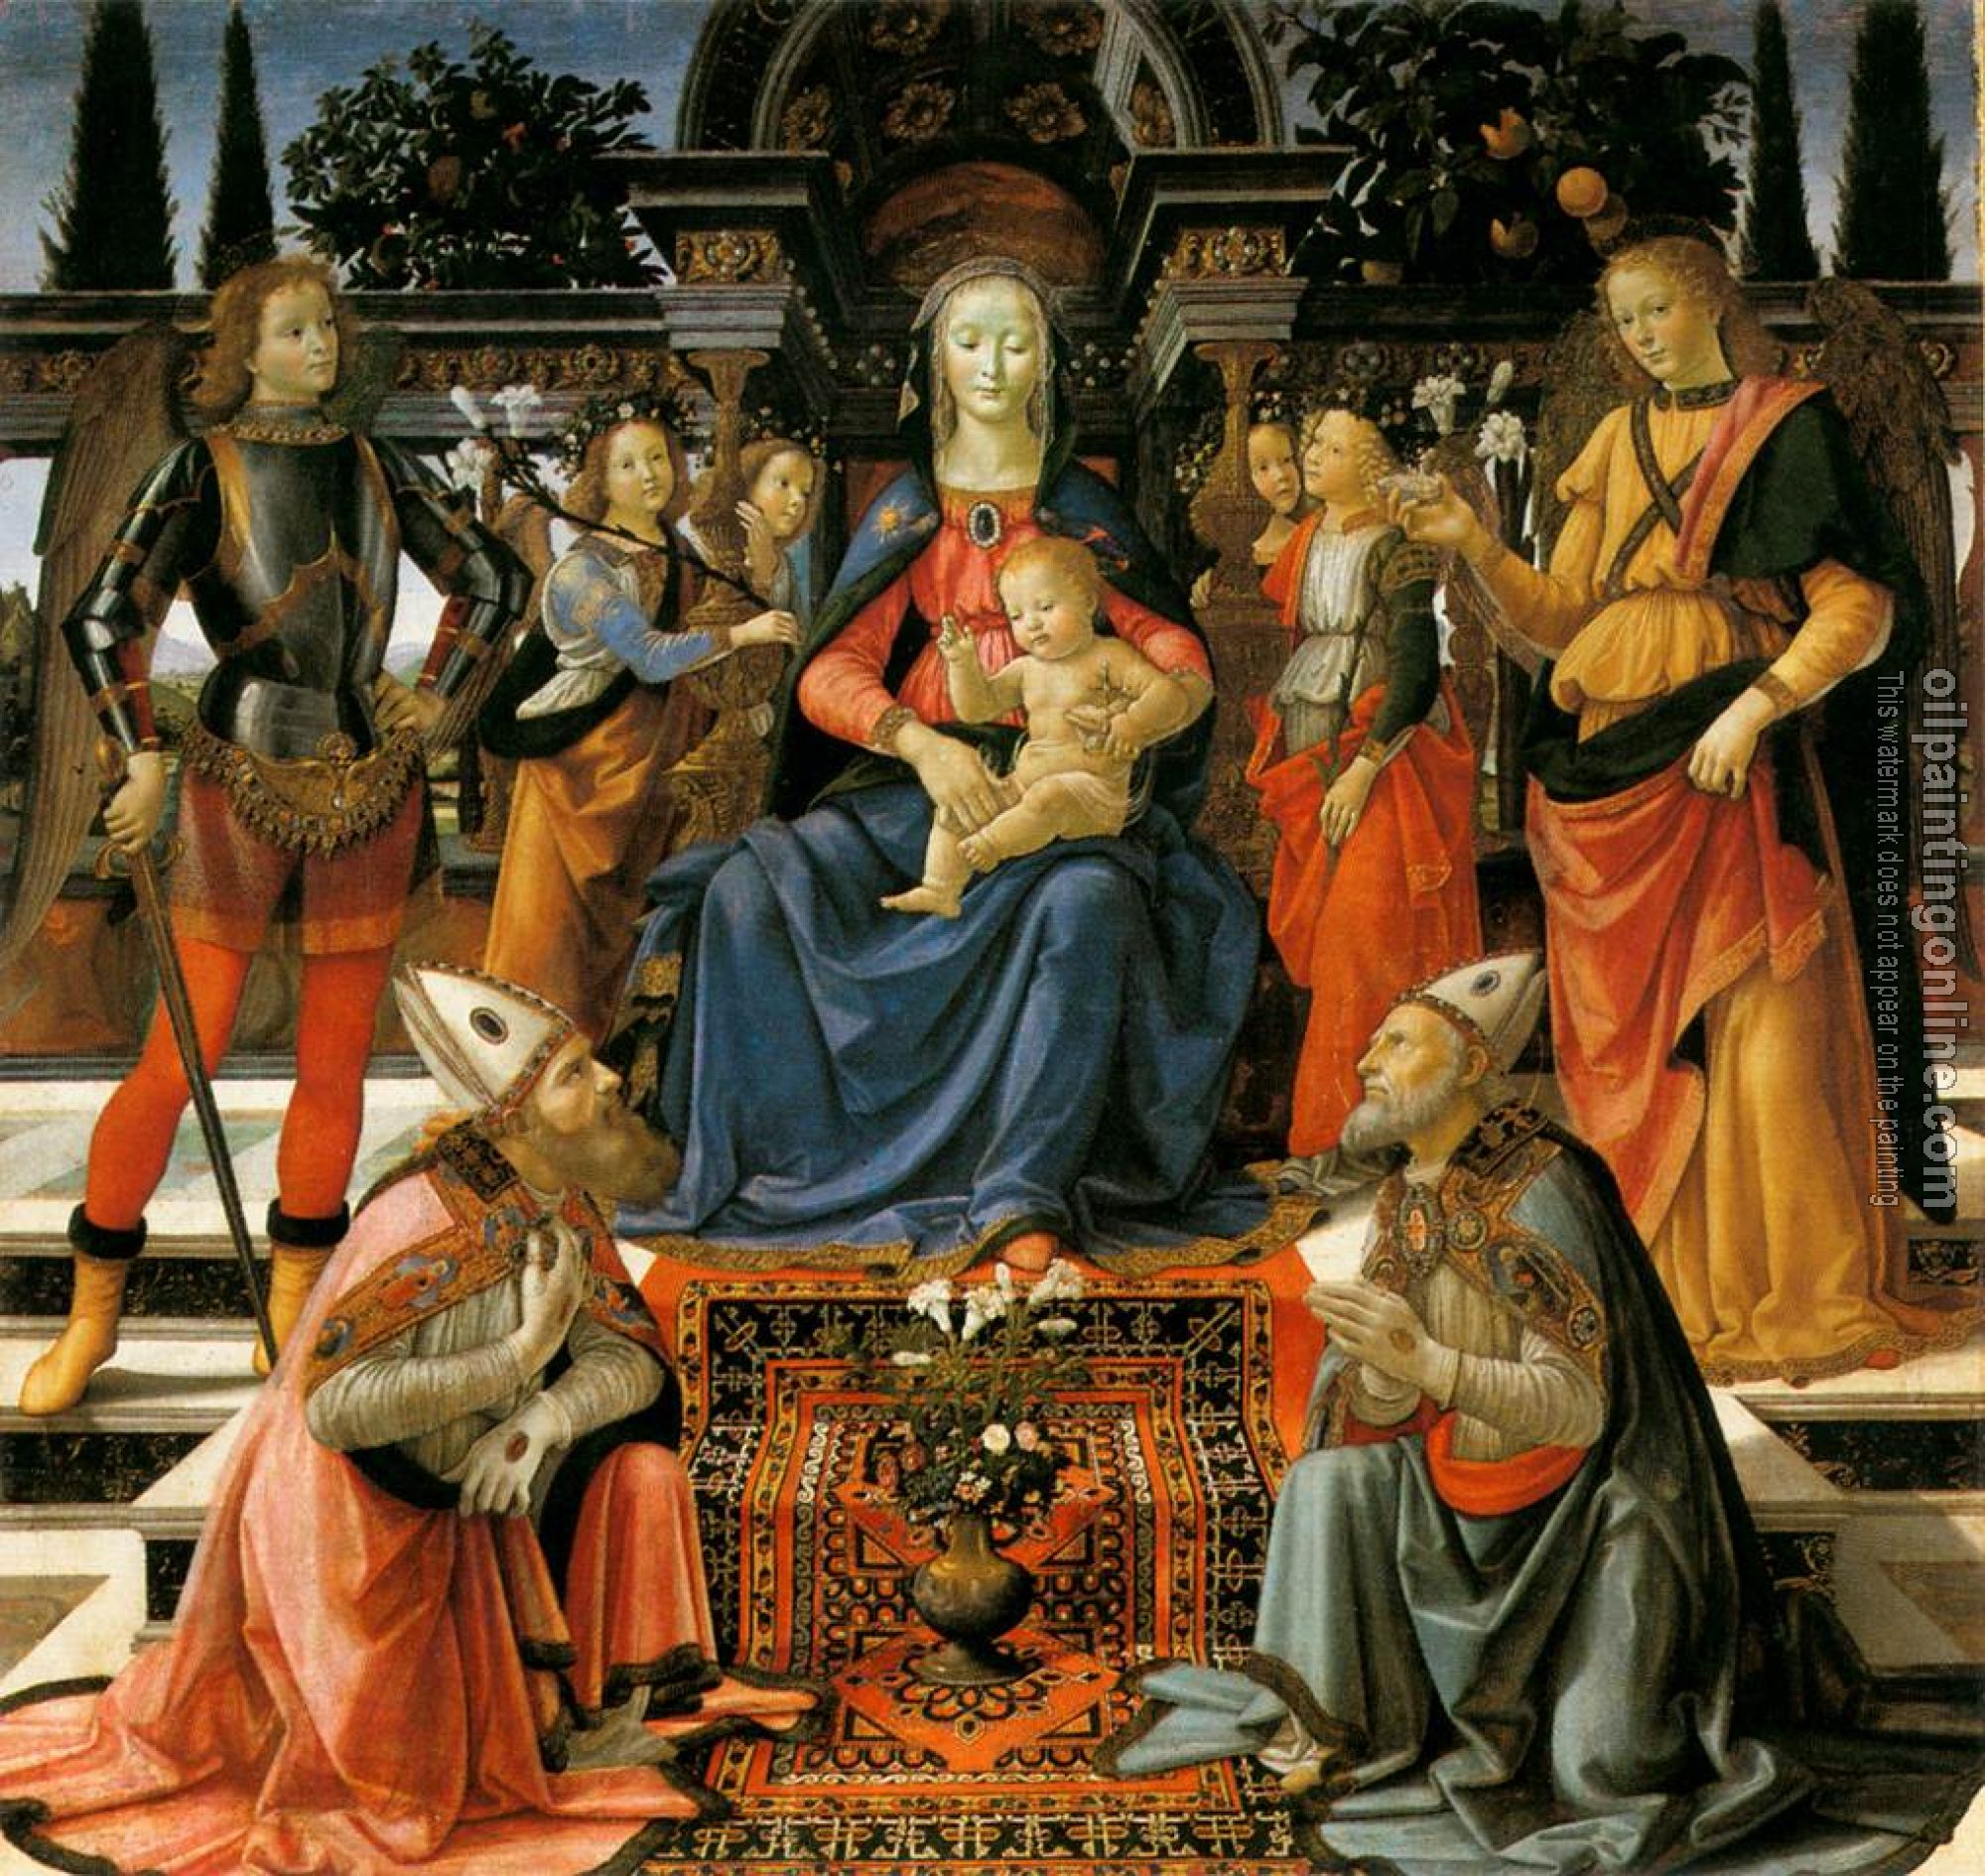 Ghirlandaio, Domenico - Madonna and Child Enthroned with Saints